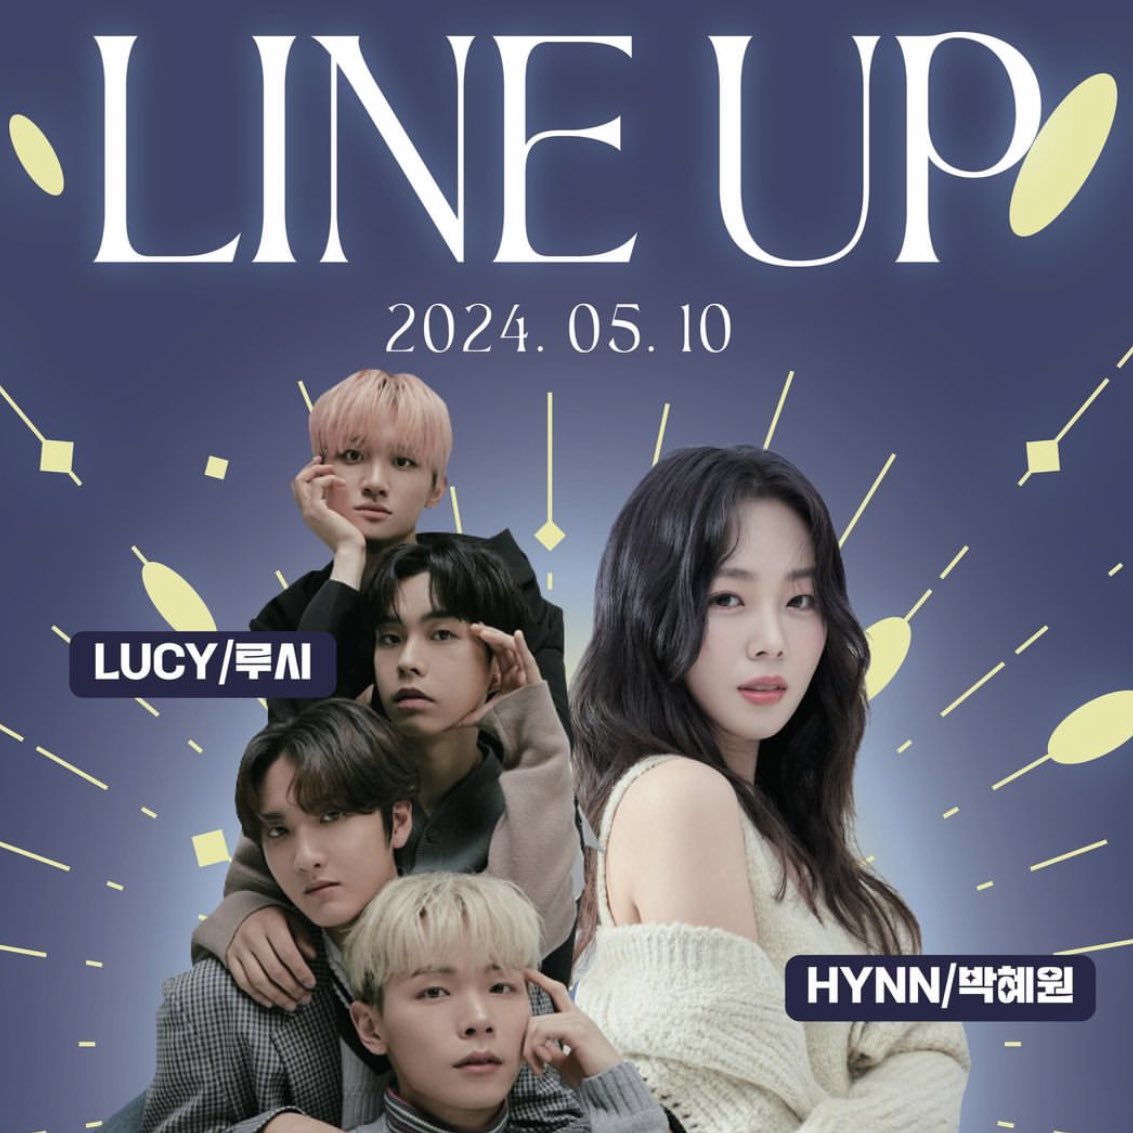 #LUCY is announced as one of the lineups for 2024 Kyungbok University festival 🗓️ May 10, 2024 (FRI) ⏰ 7-10 PM KST 📍 Central Square